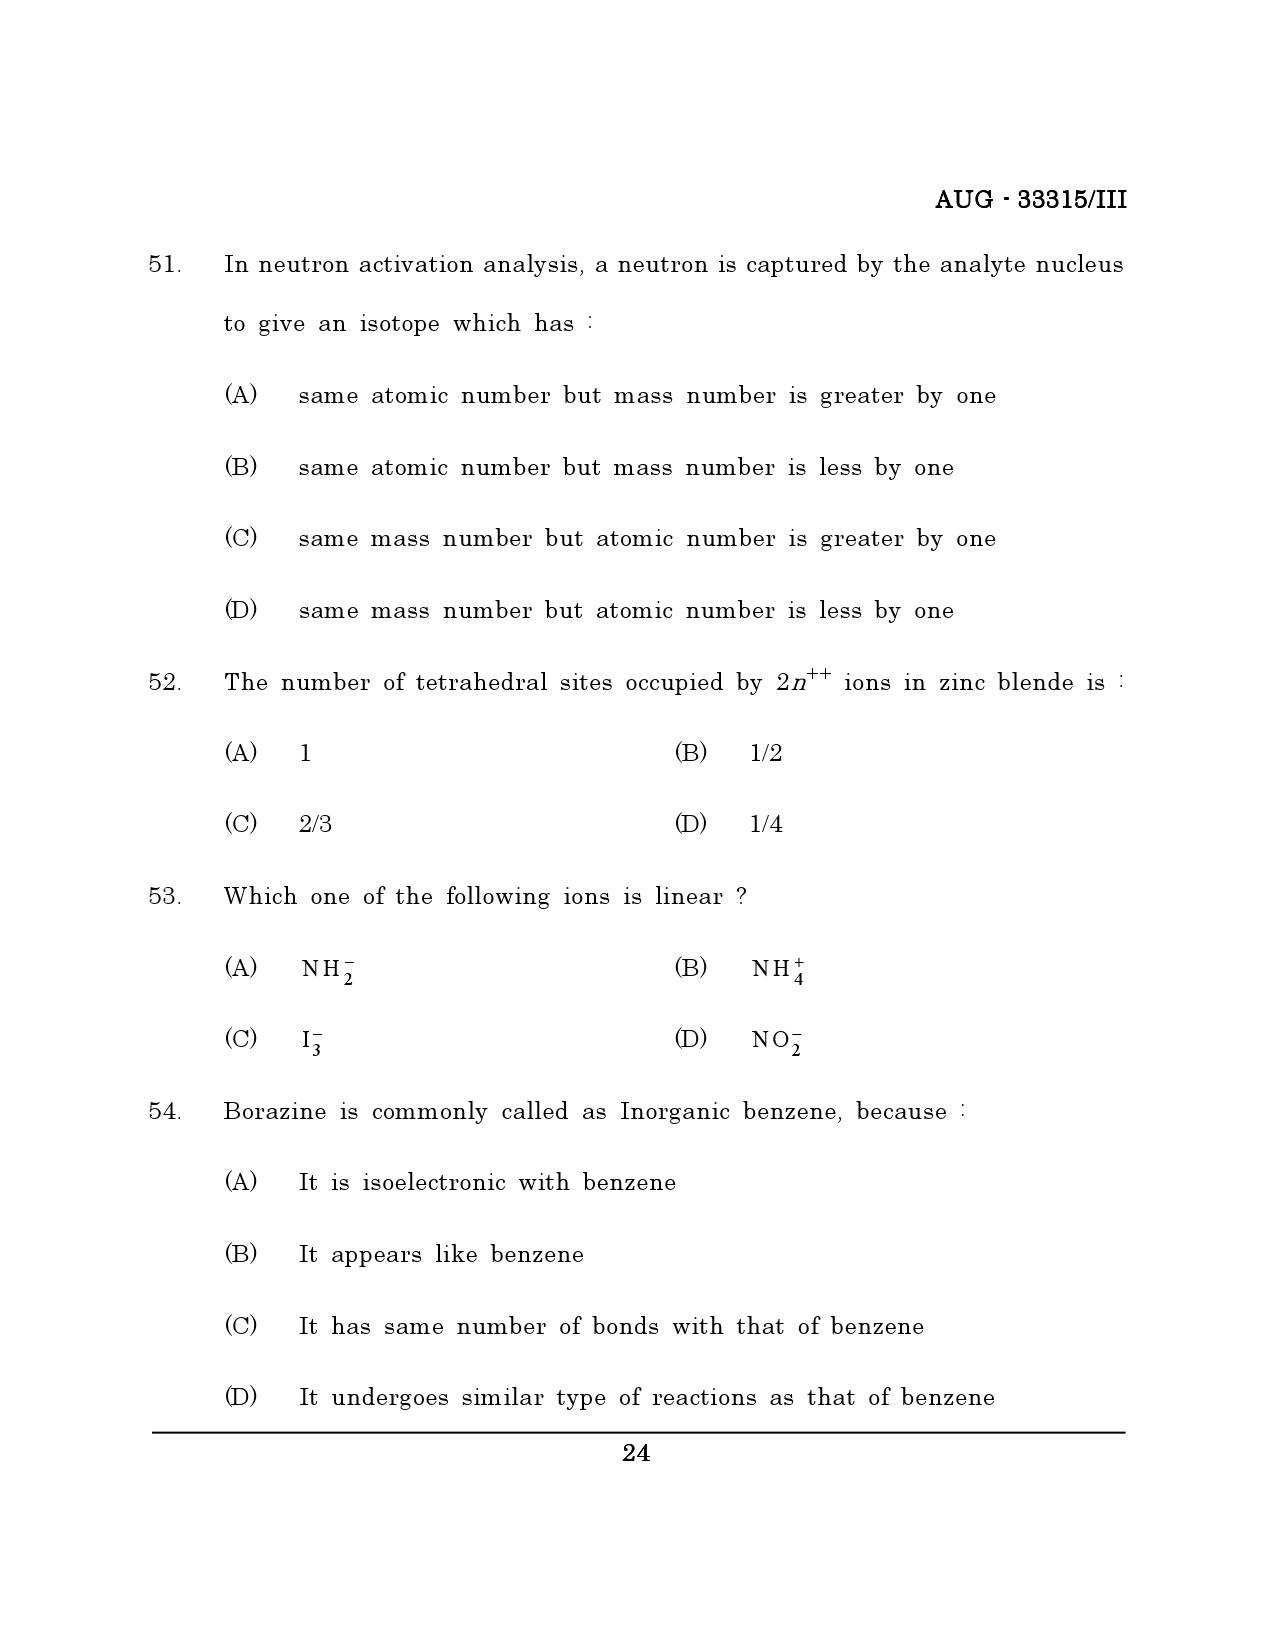 Maharashtra SET Chemical Sciences Question Paper III August 2015 23